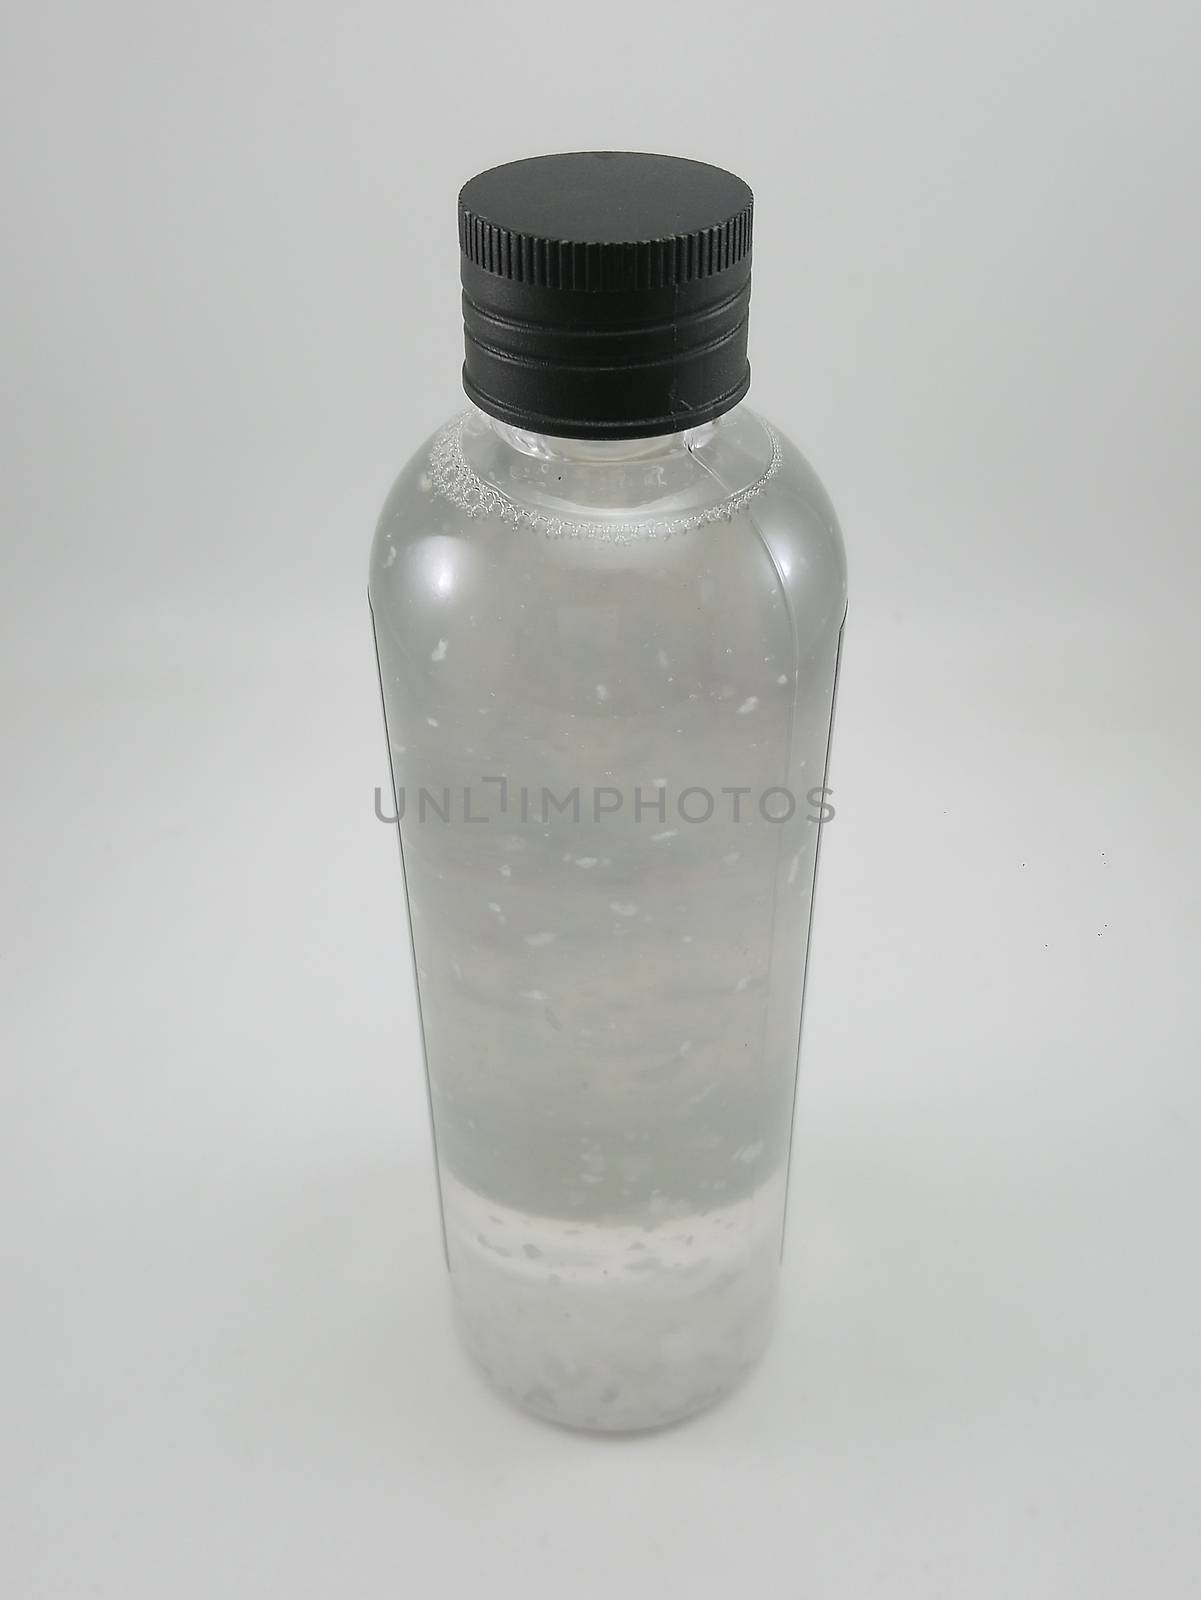 Extra virgin coconut oil placed in clear transparent plastic bottle product of the Philippines